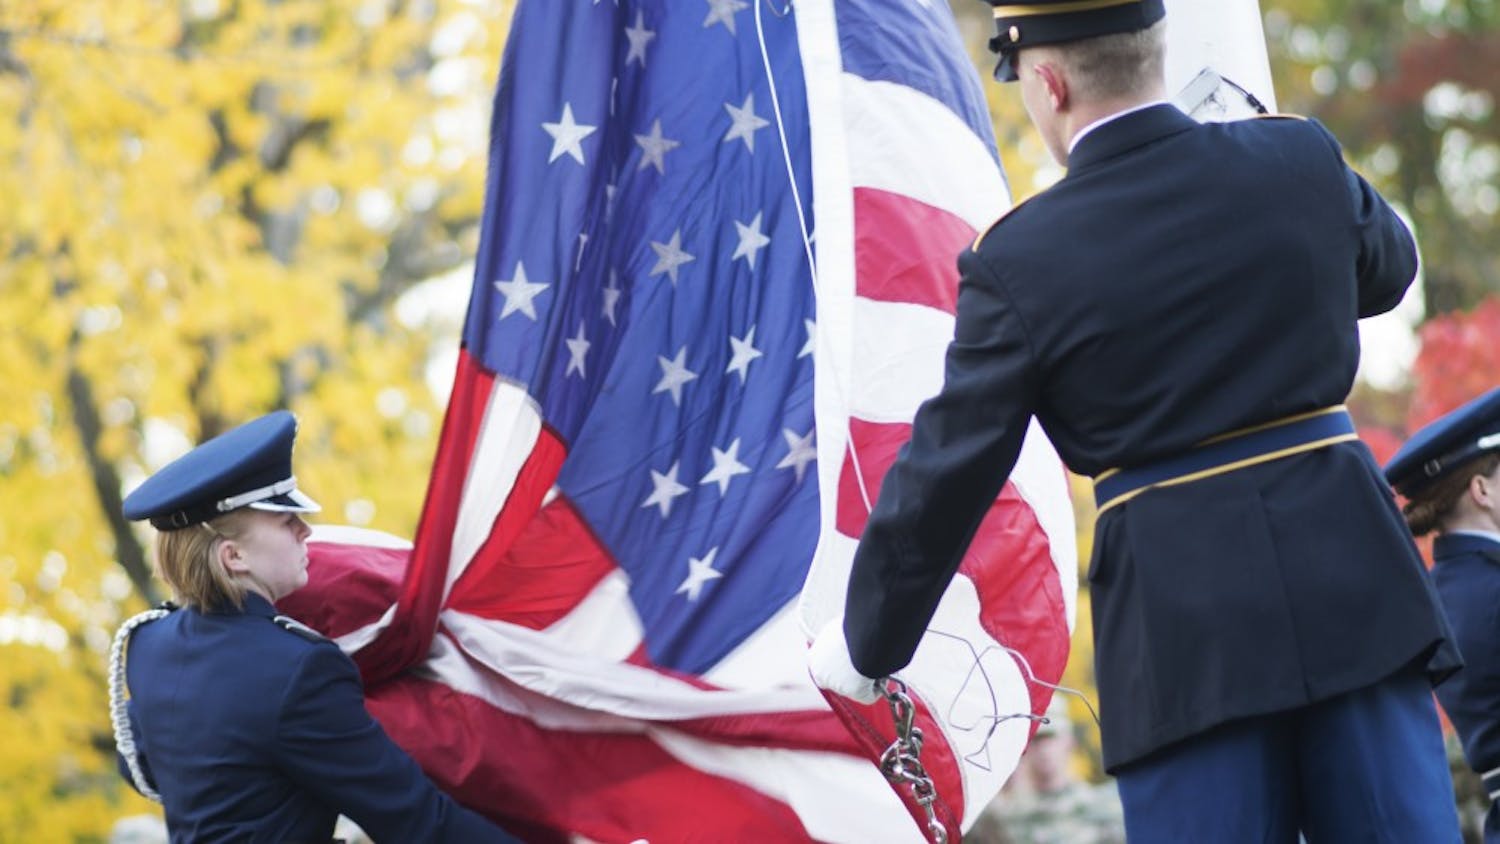 Members of the IU Army and Air Force Reserve Officer Training Corps color guard unfurl the flag to raise it during a sunrise Veterans Day ceremony on Friday. The ceremony, which was held outside of Franklin Hall, honored veterans and those currently serving in the armed forces.